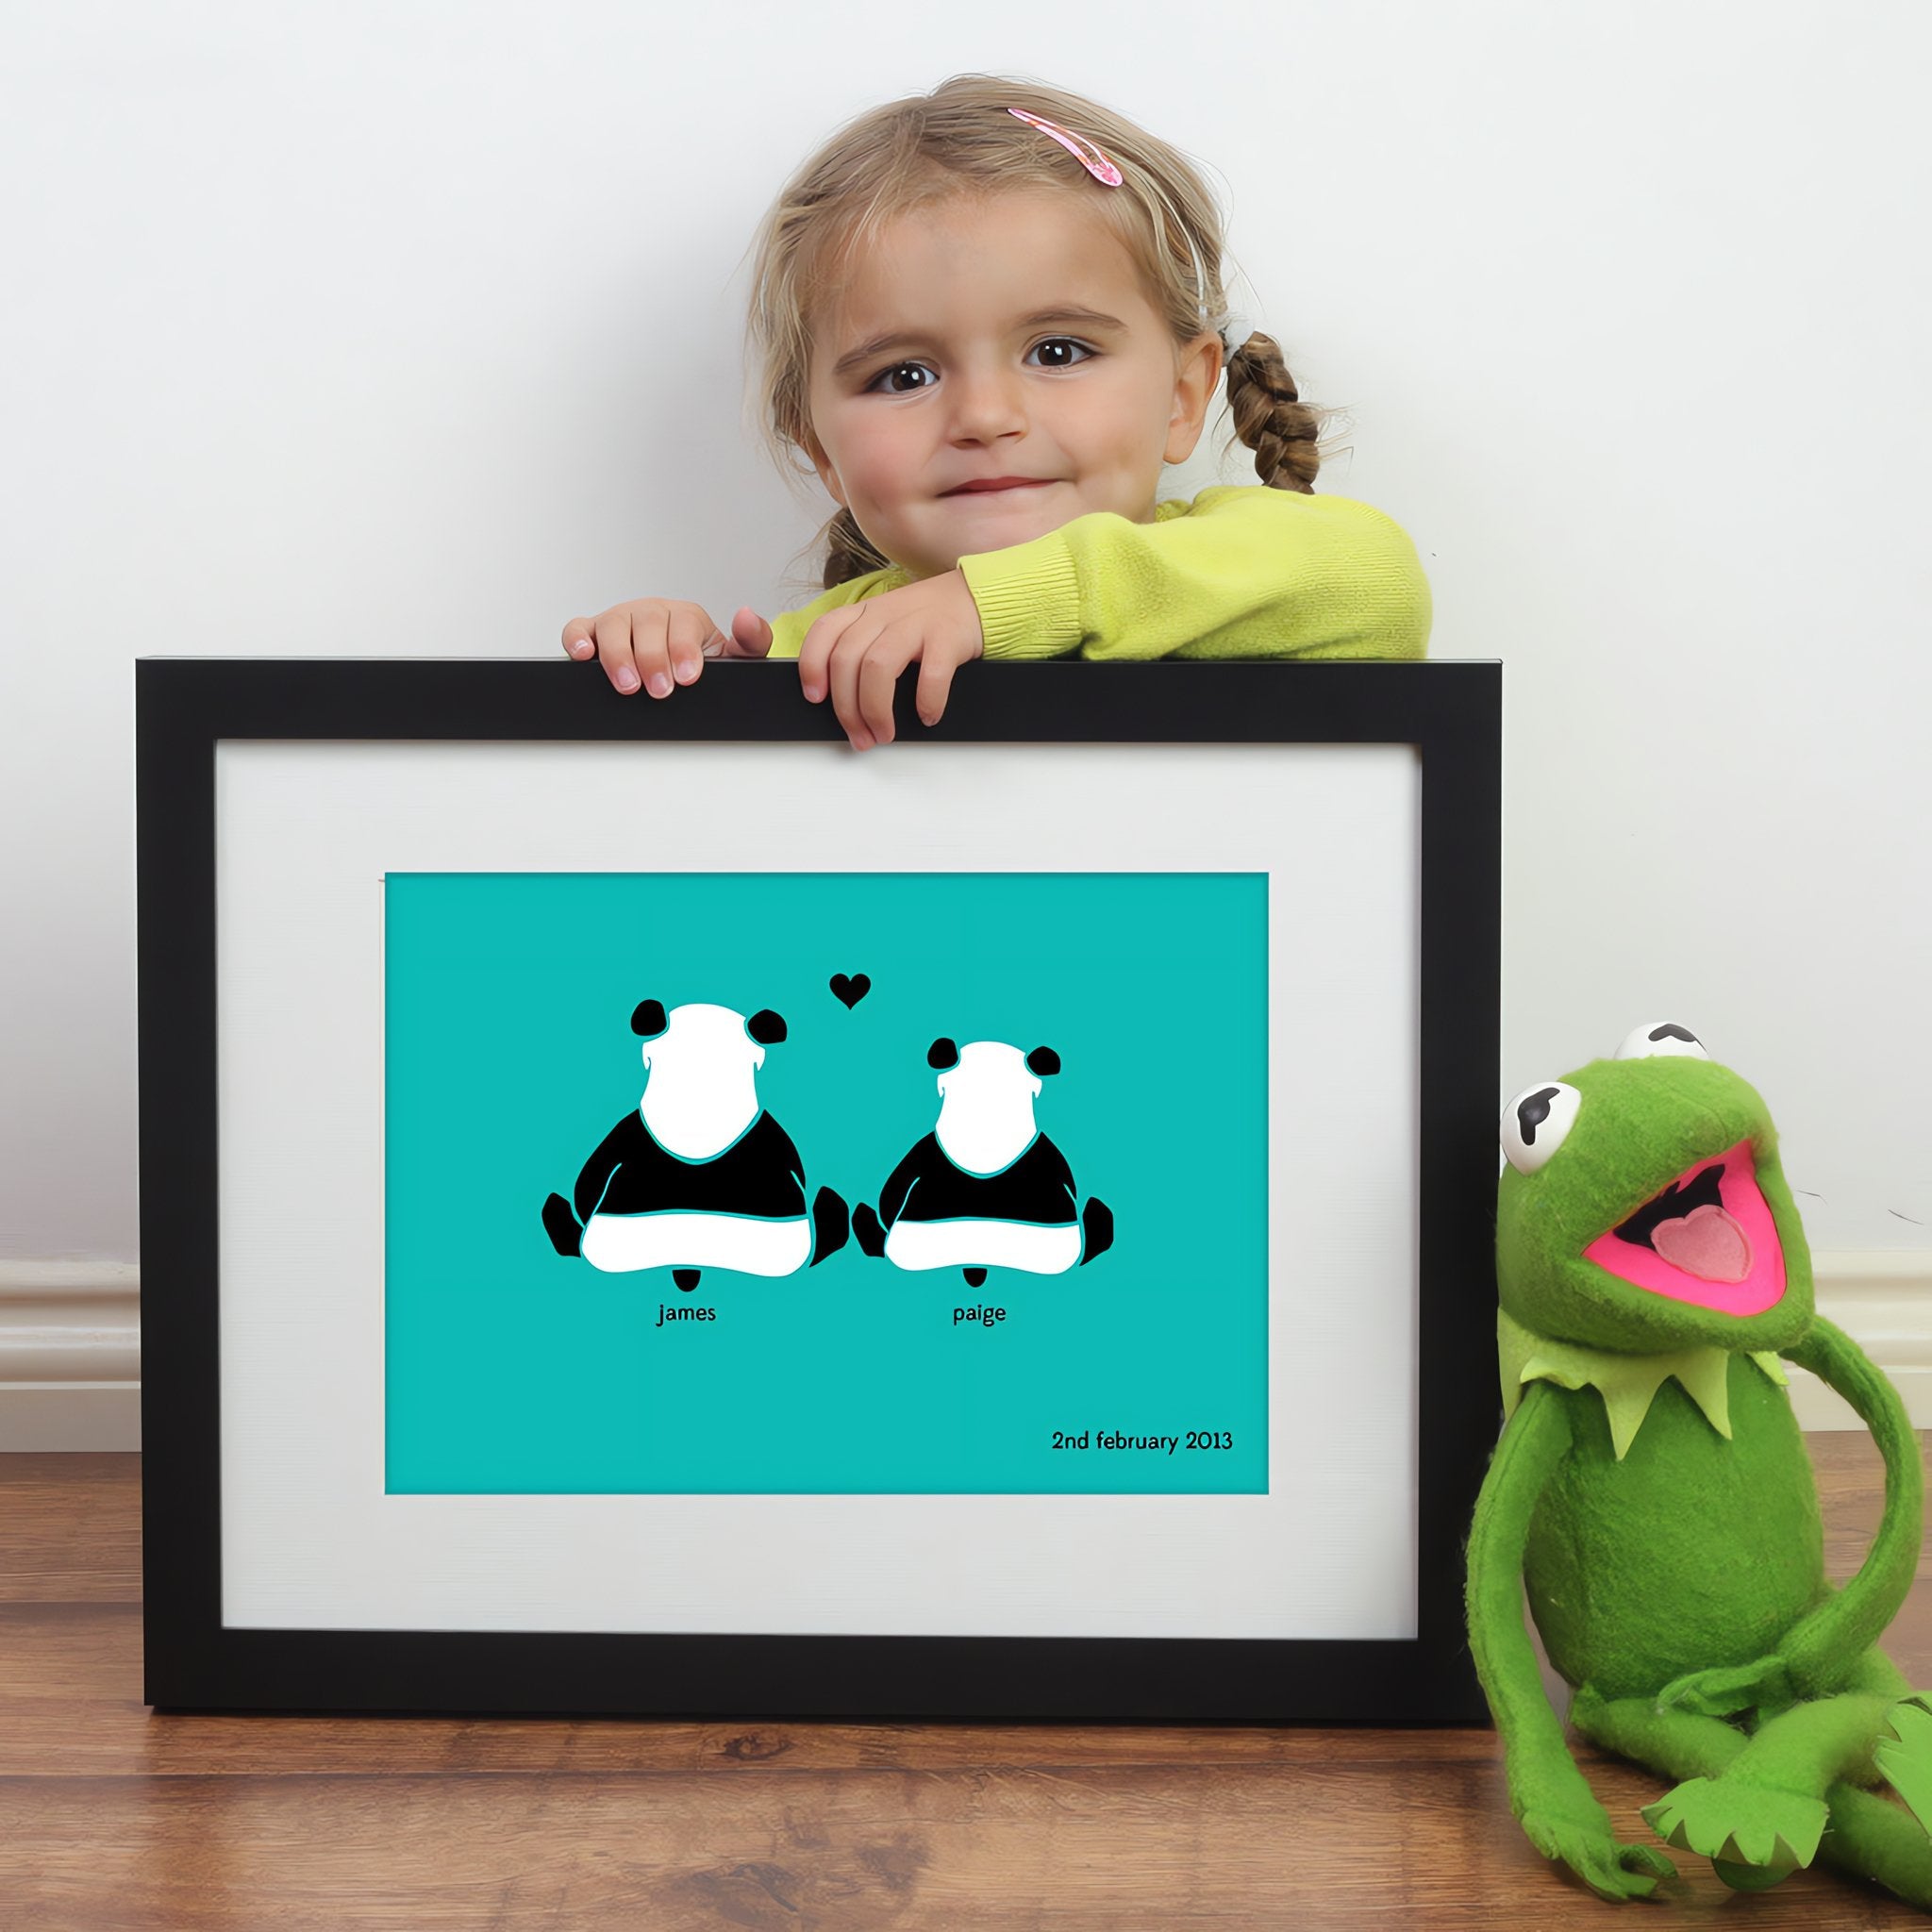 Personalized framed print of 2 pandas in love with a significant date next to kermit the frog and a young girl.